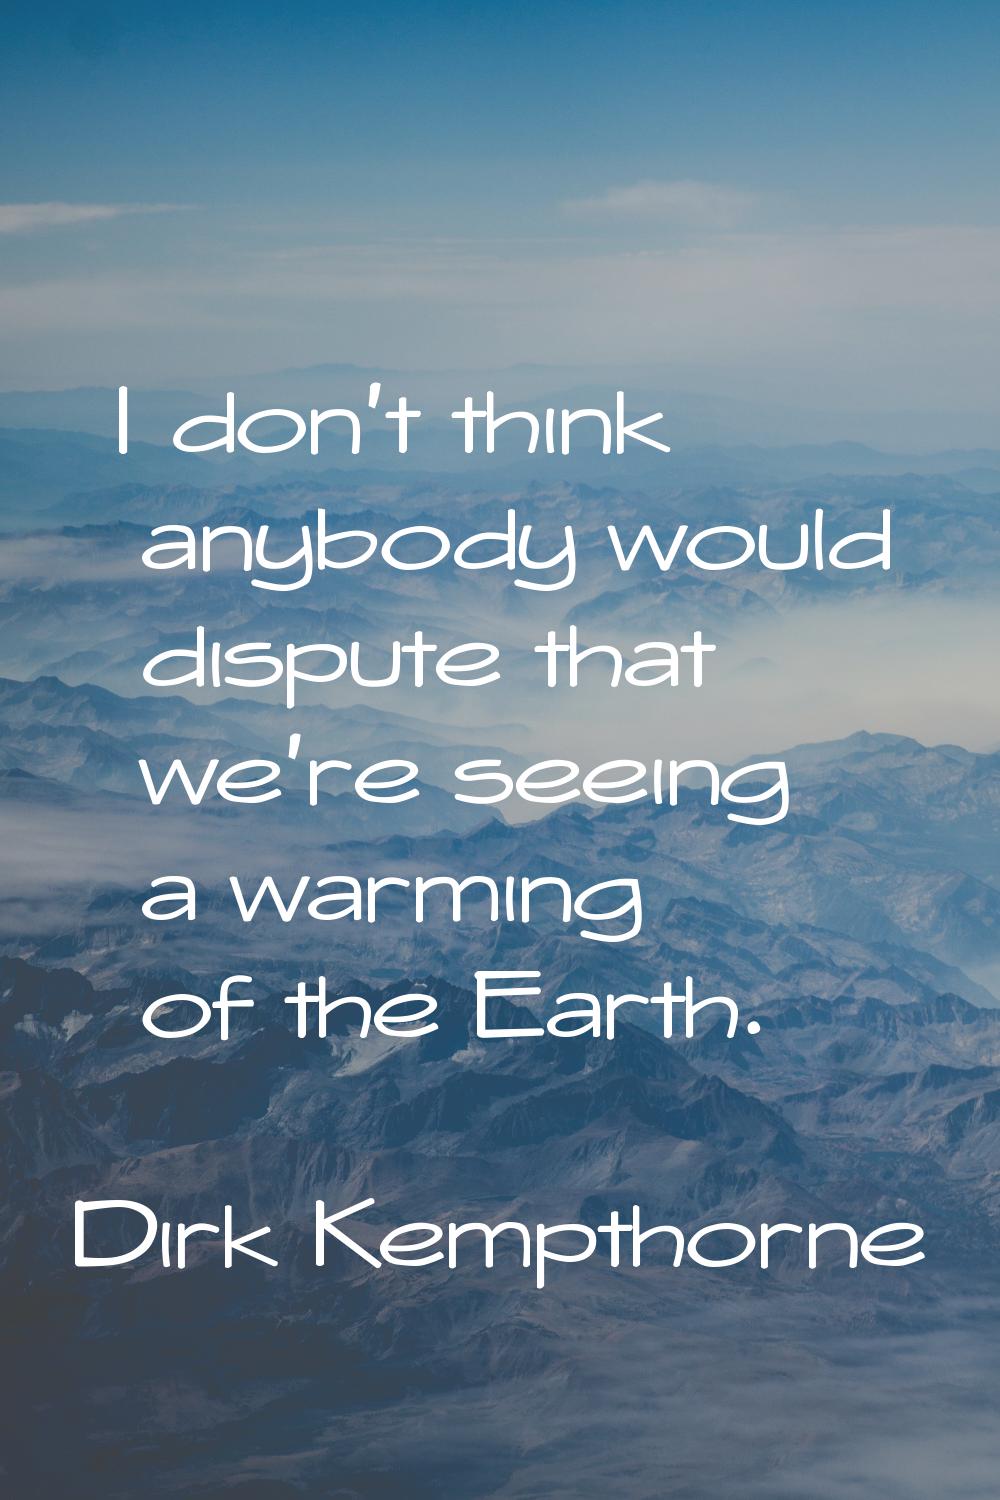 I don't think anybody would dispute that we're seeing a warming of the Earth.